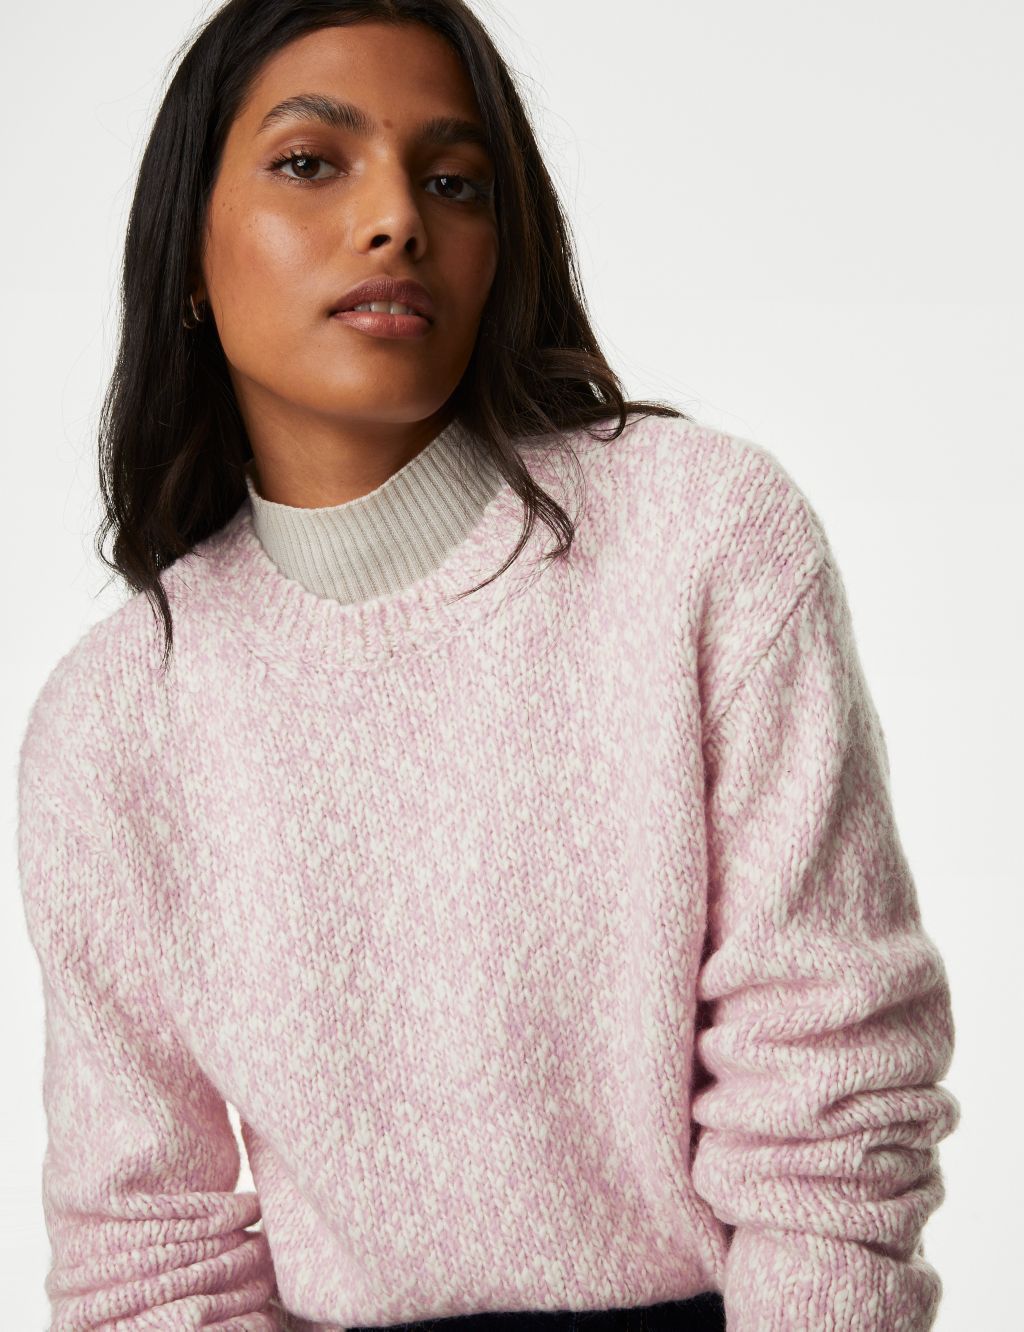 Textured Crew Neck Jumper with Wool image 1